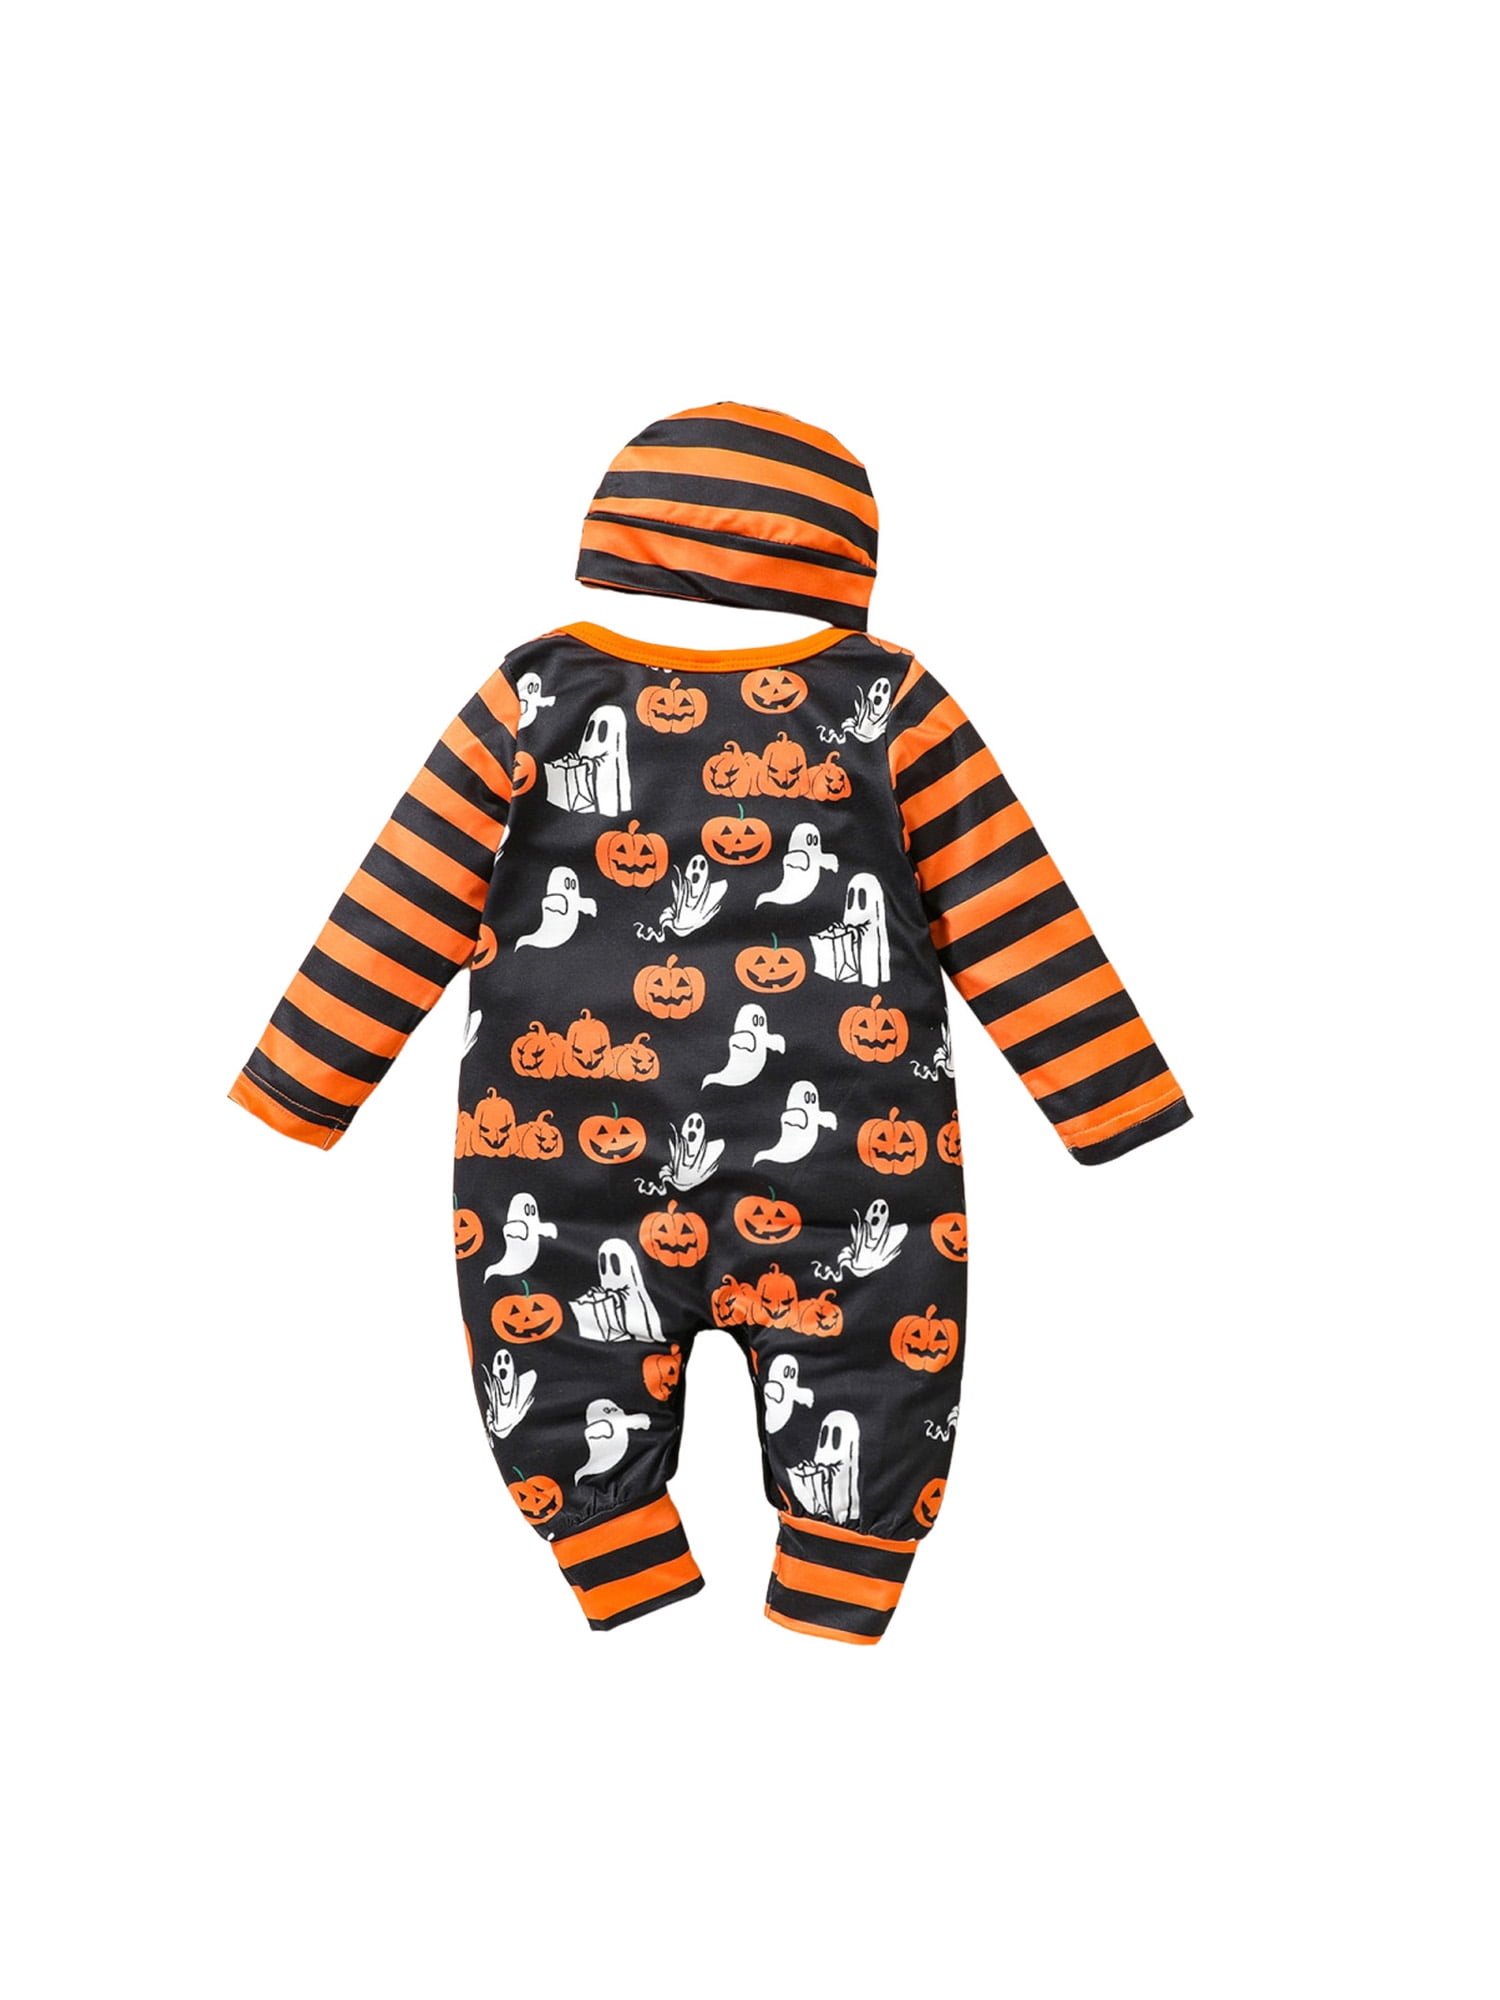 Baby Food! 6M NWT Boys SIZE 3M Months My 1st THANKSGIVING 1 Piece Creeper 